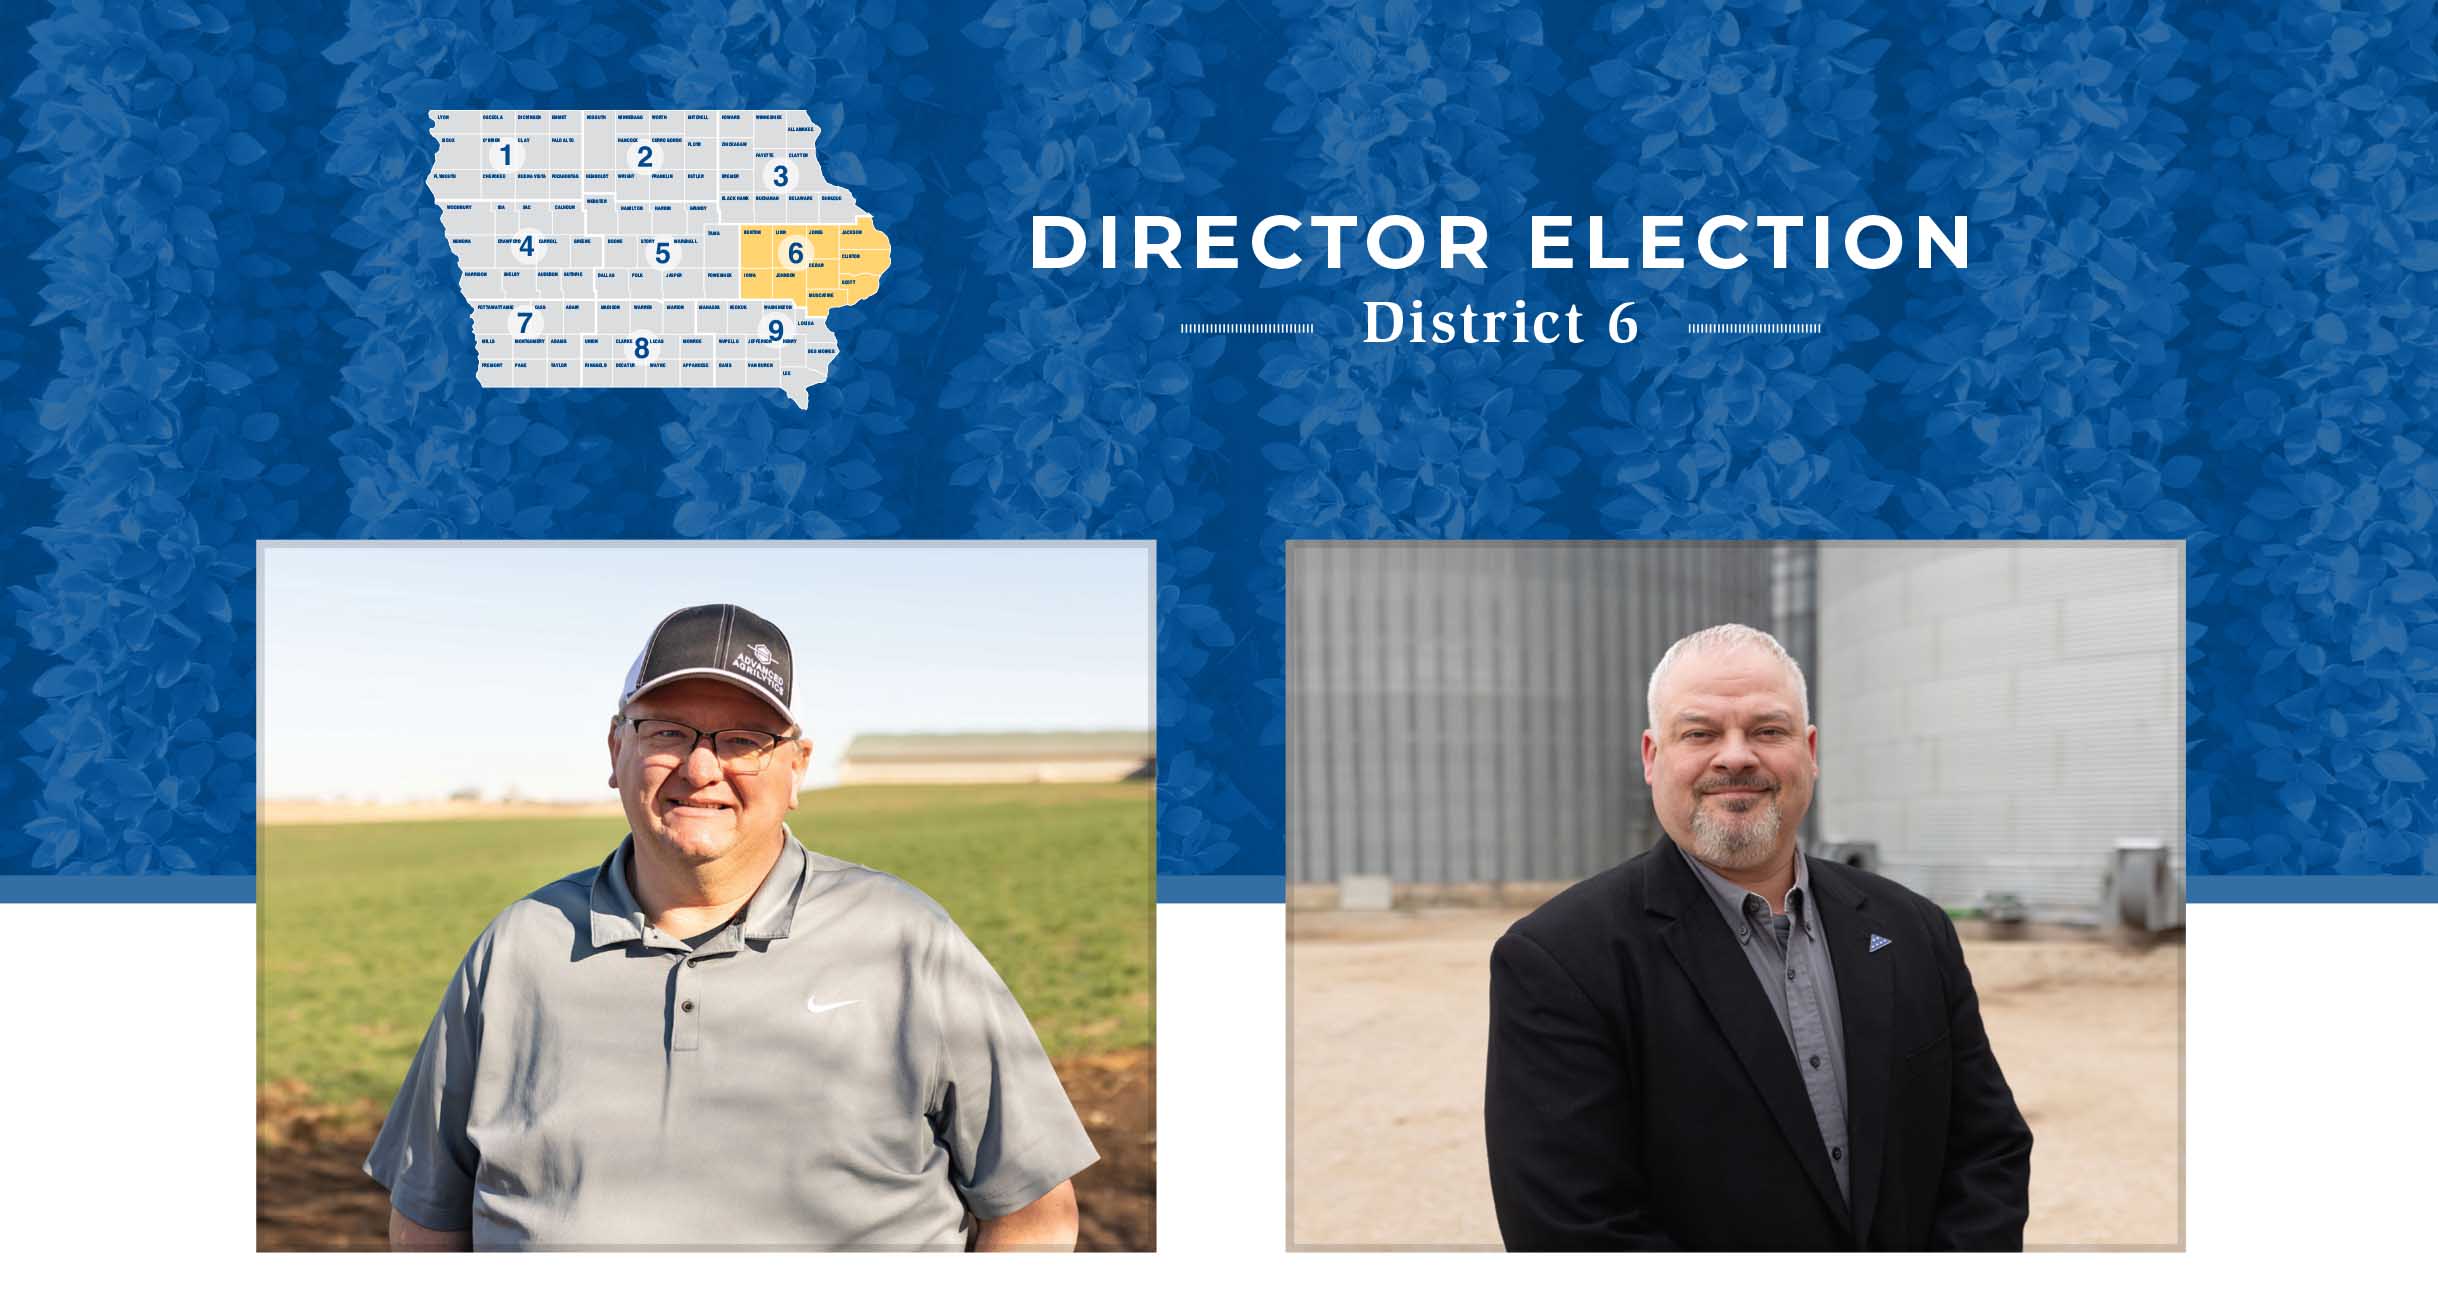 Farmers running for District 6